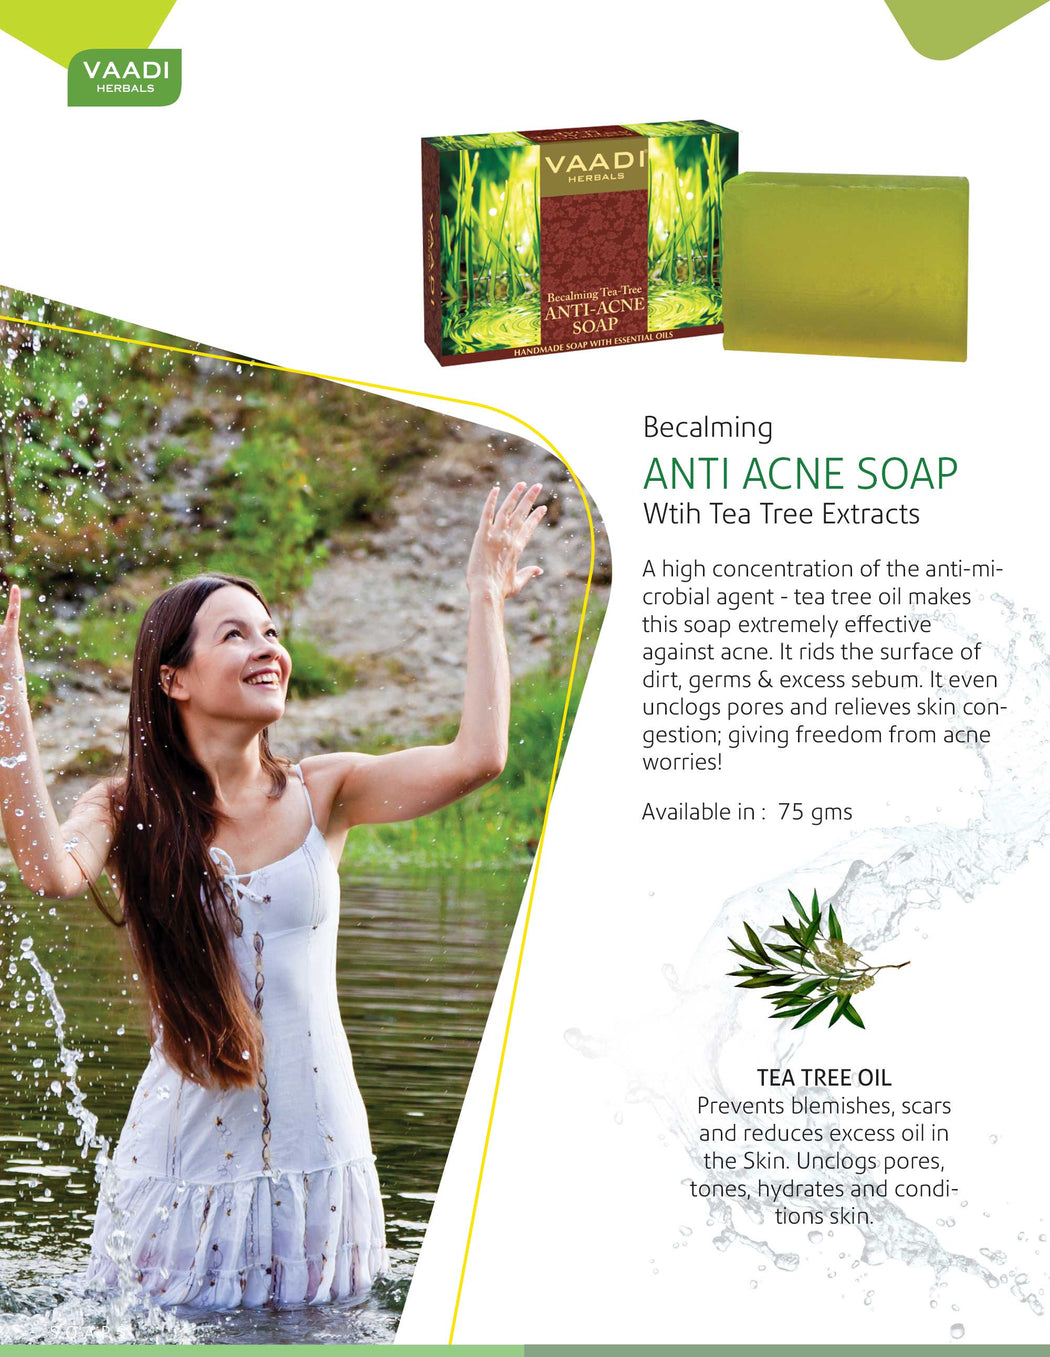 Becalming Tea Tree Soap Anti-Acne therapy (75 gms)